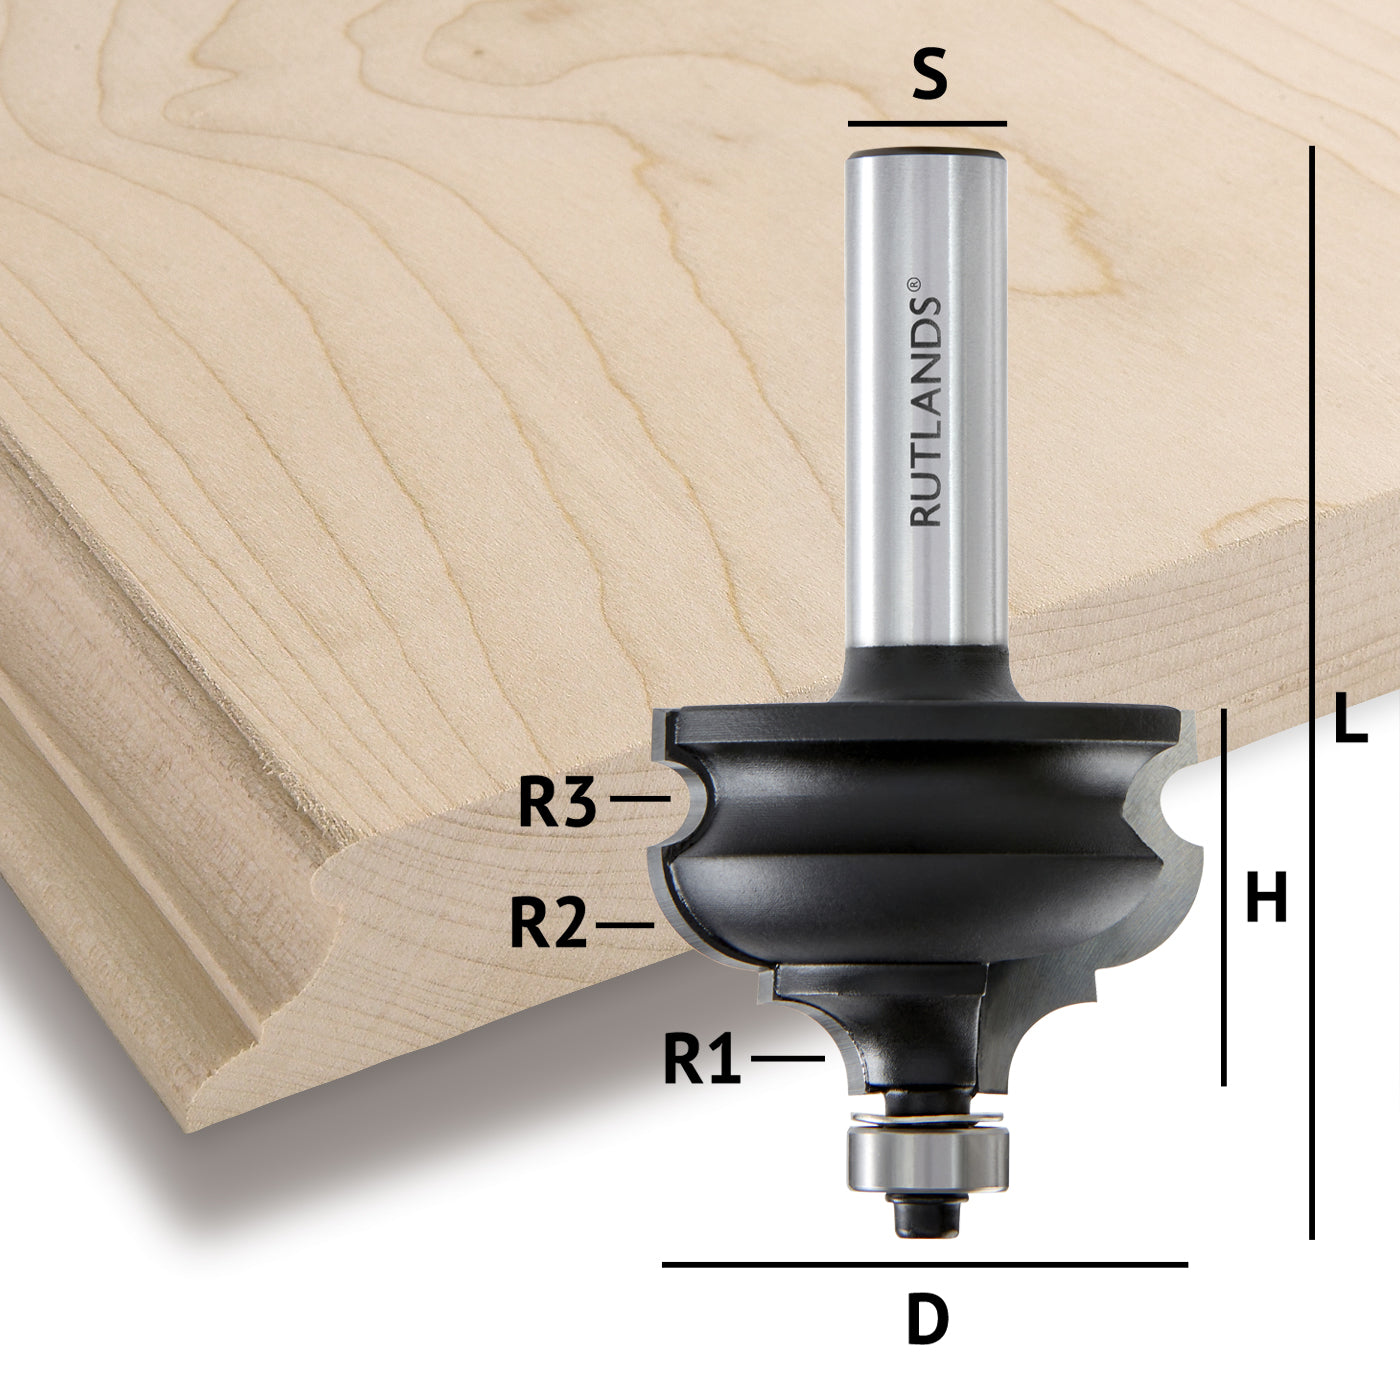 Router Bit - Bold Classical Ogee - D=44.5mm H=30.2mm R1=7.14mm L=84mm S=1/2"